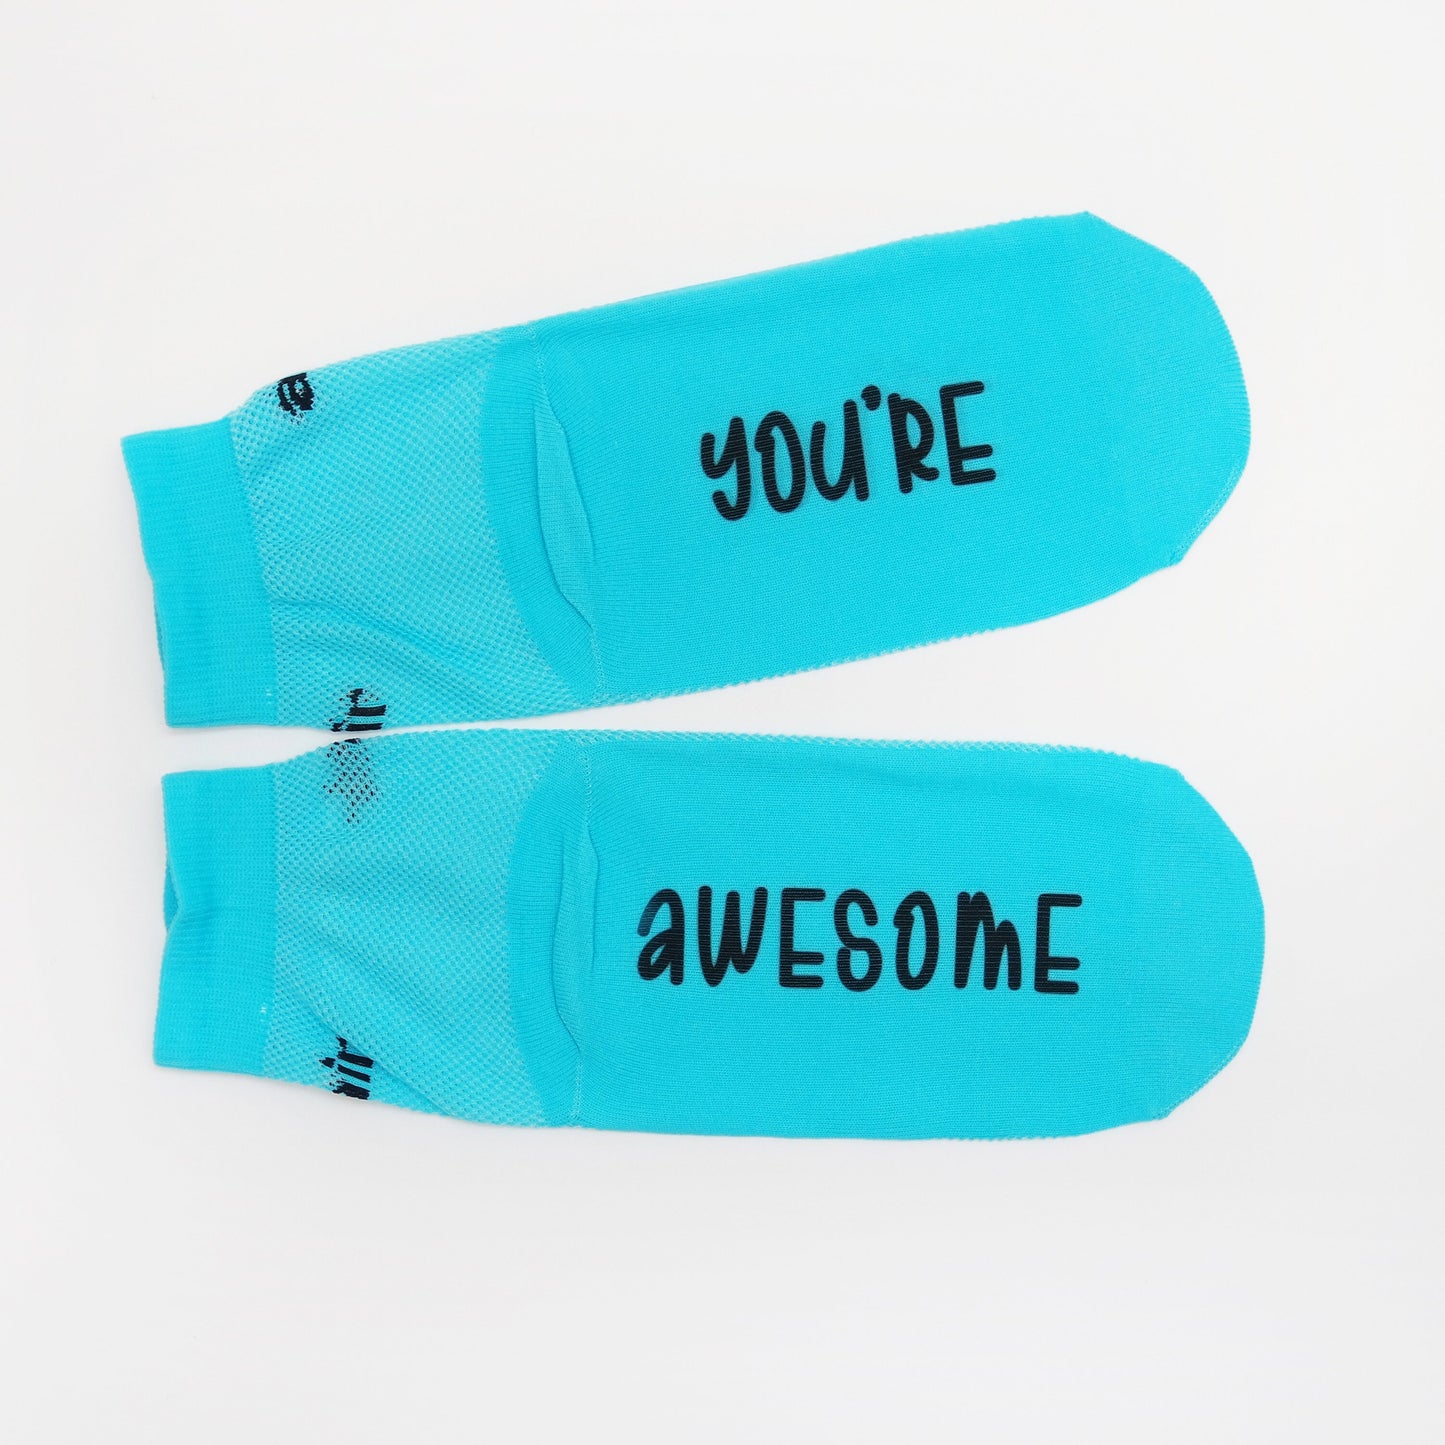 You're Awesome Motivation Performance Socks, Inspirational Quote on Sock, Positivity, Love Yourself, Affirming Words, Think Positive Gifts